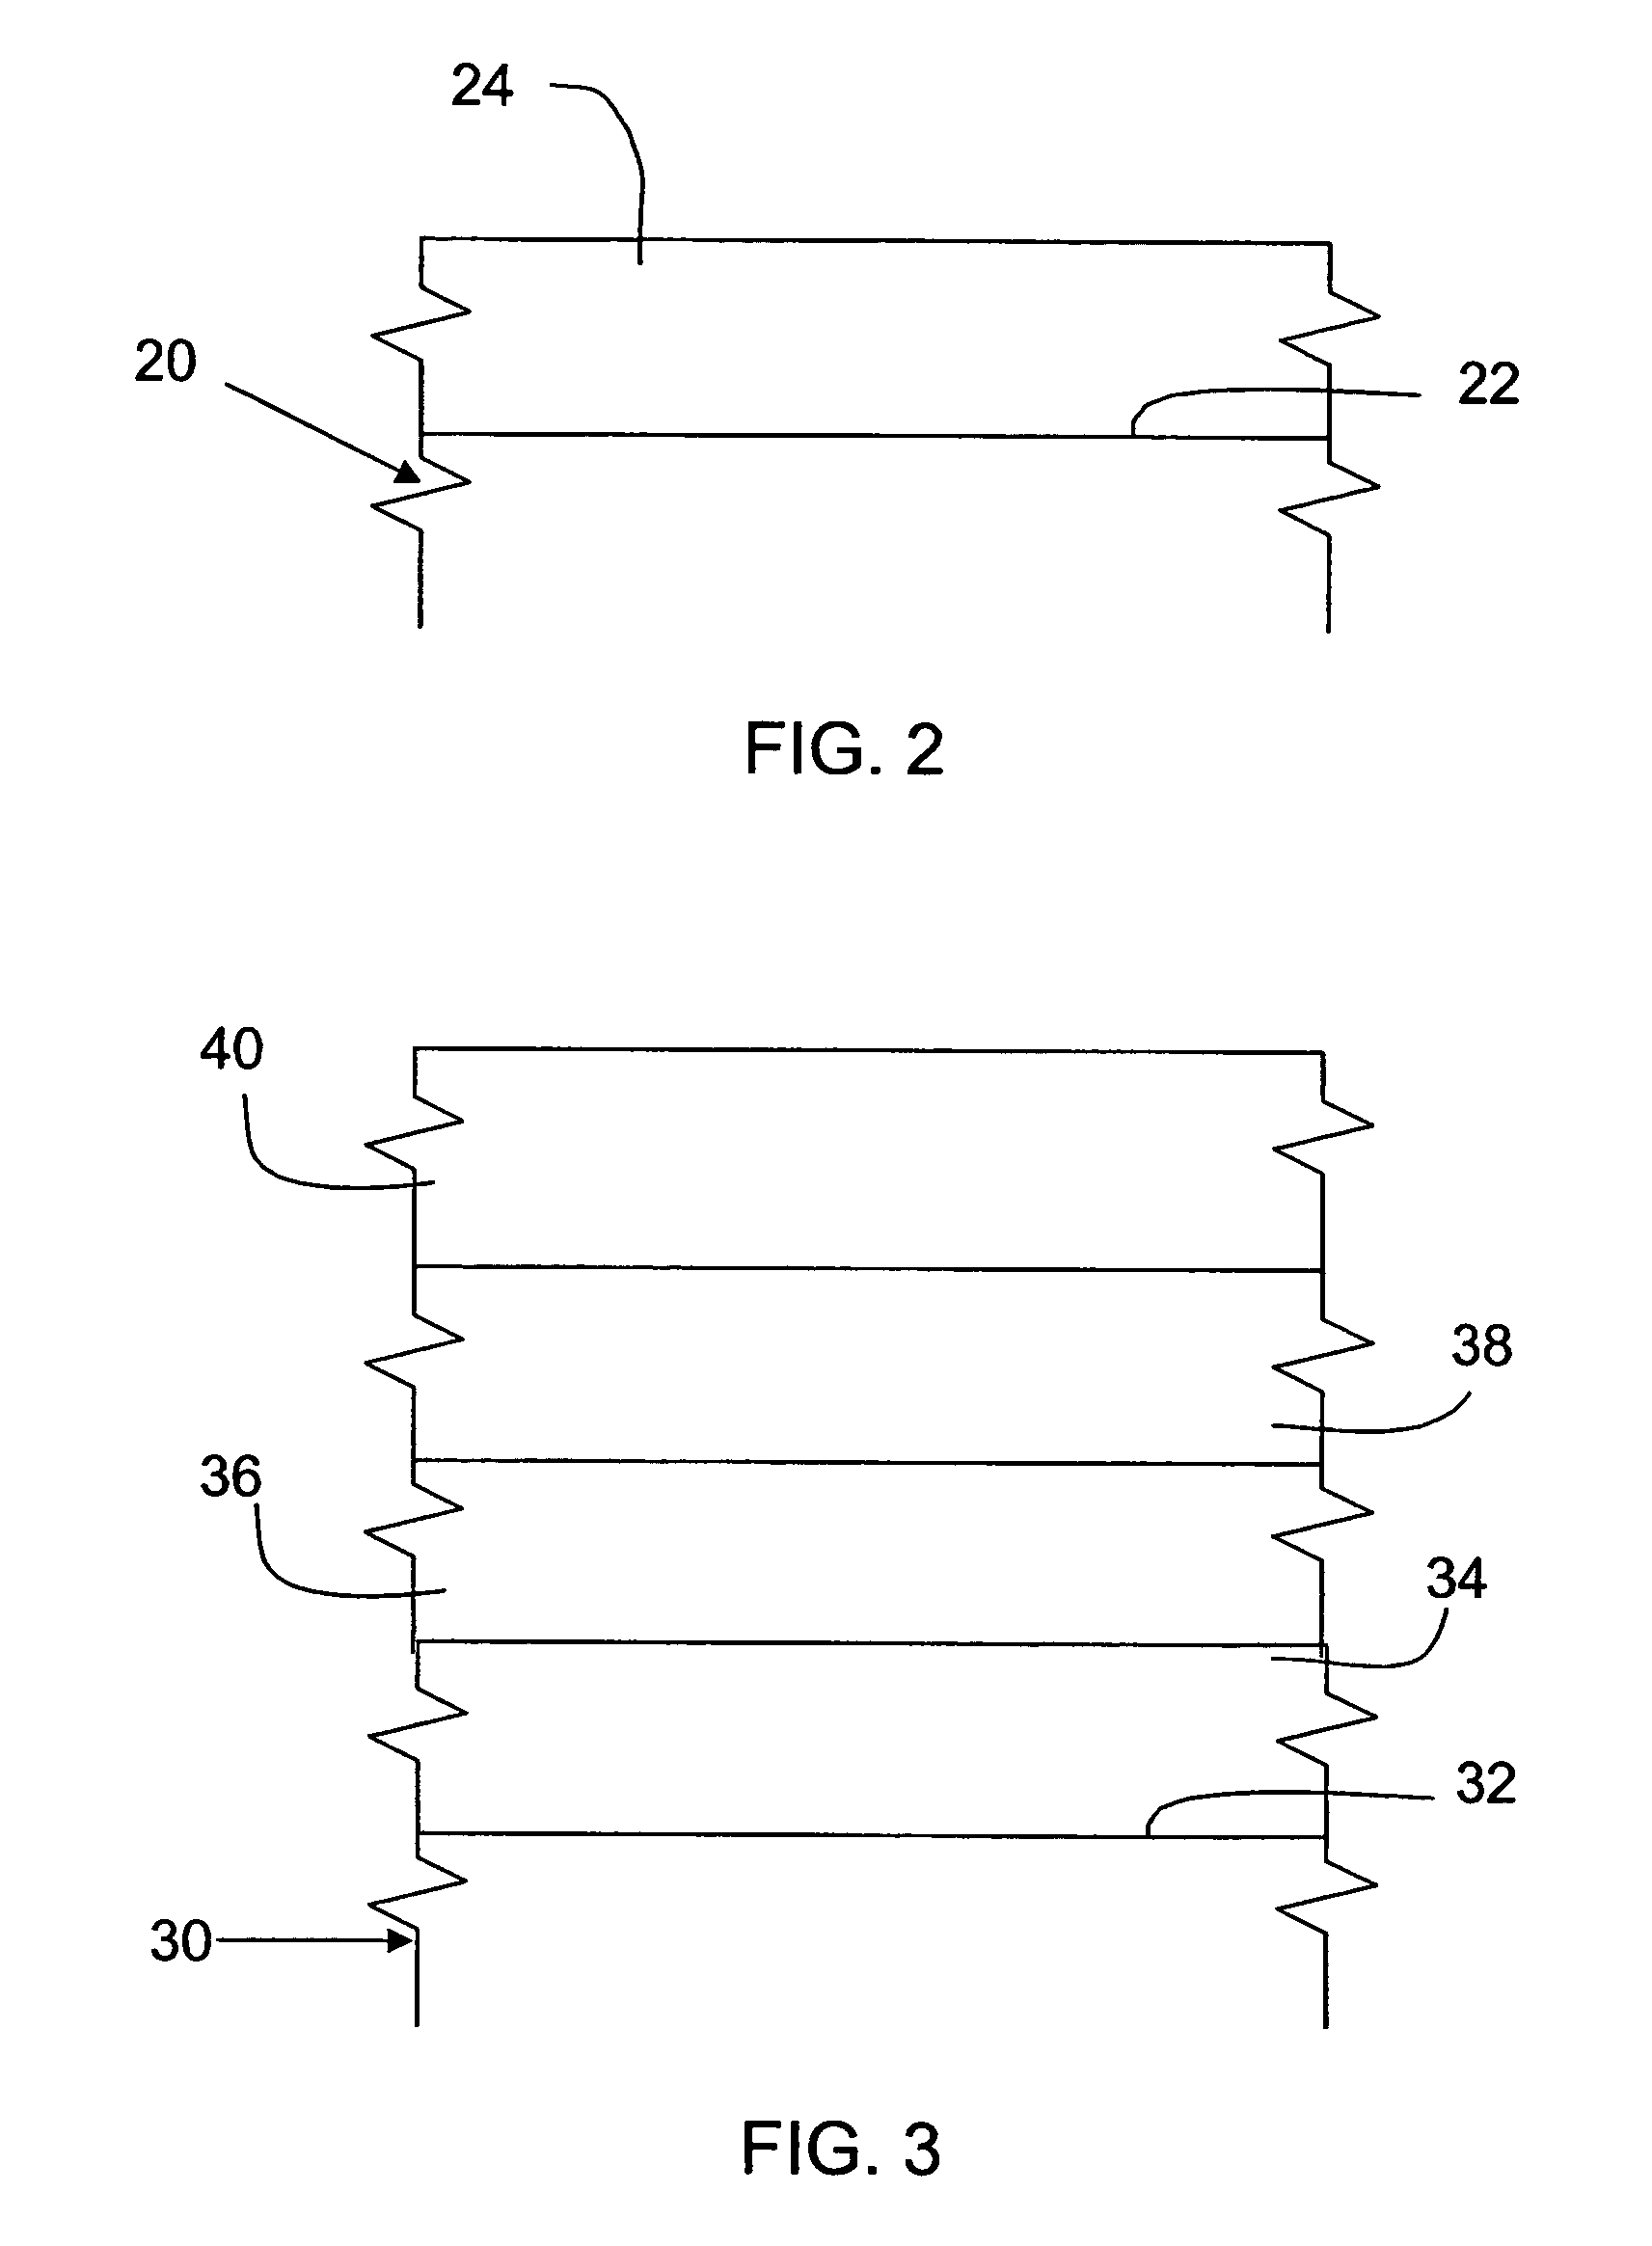 Oxidation resistant coatings, processes for coating articles, and their coated articles